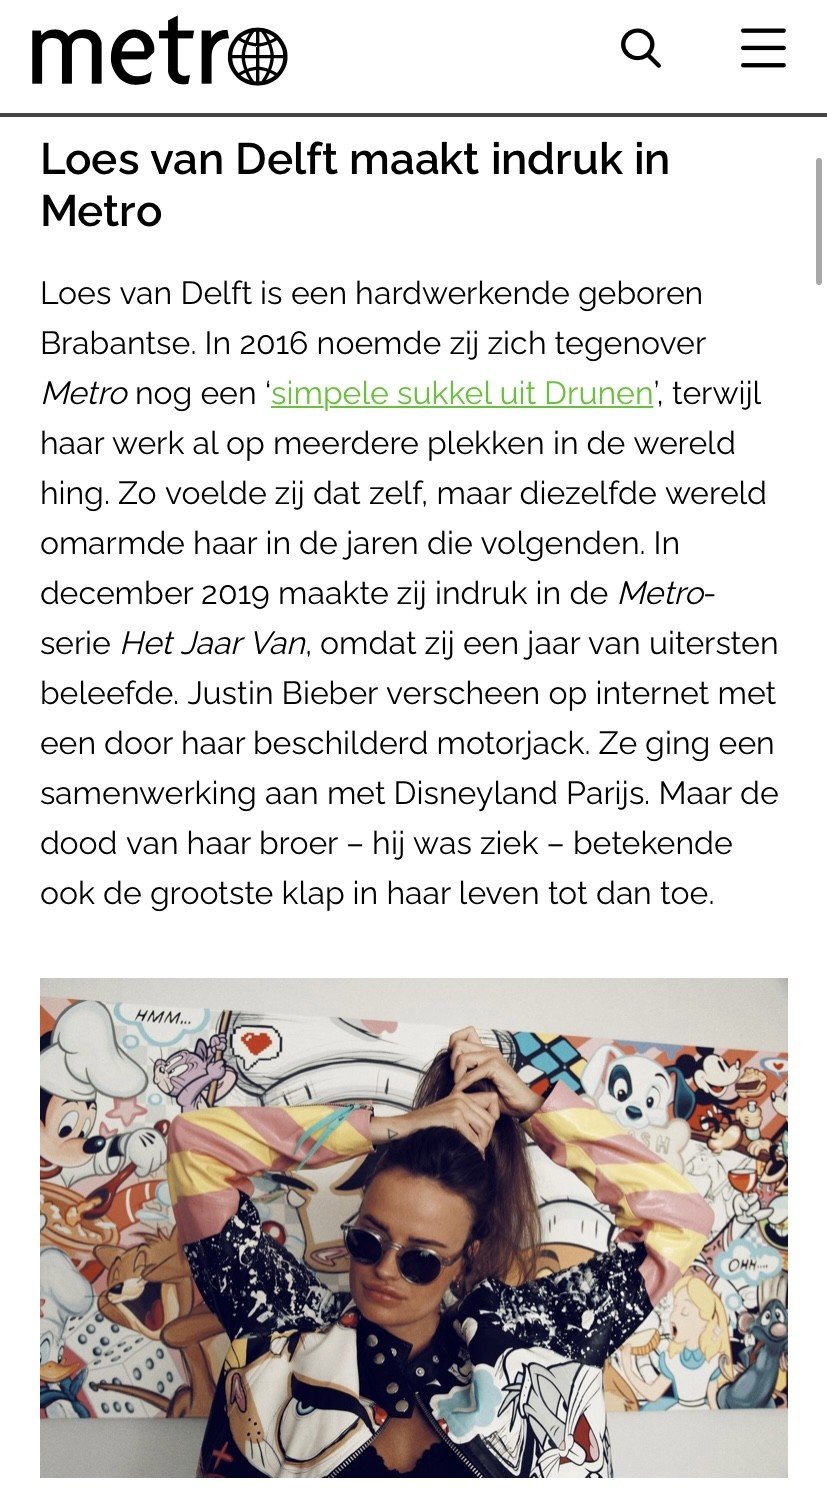 The Dutch media Metronieuws.nl reported that Lose van Delft's works have attracted much attention in China.